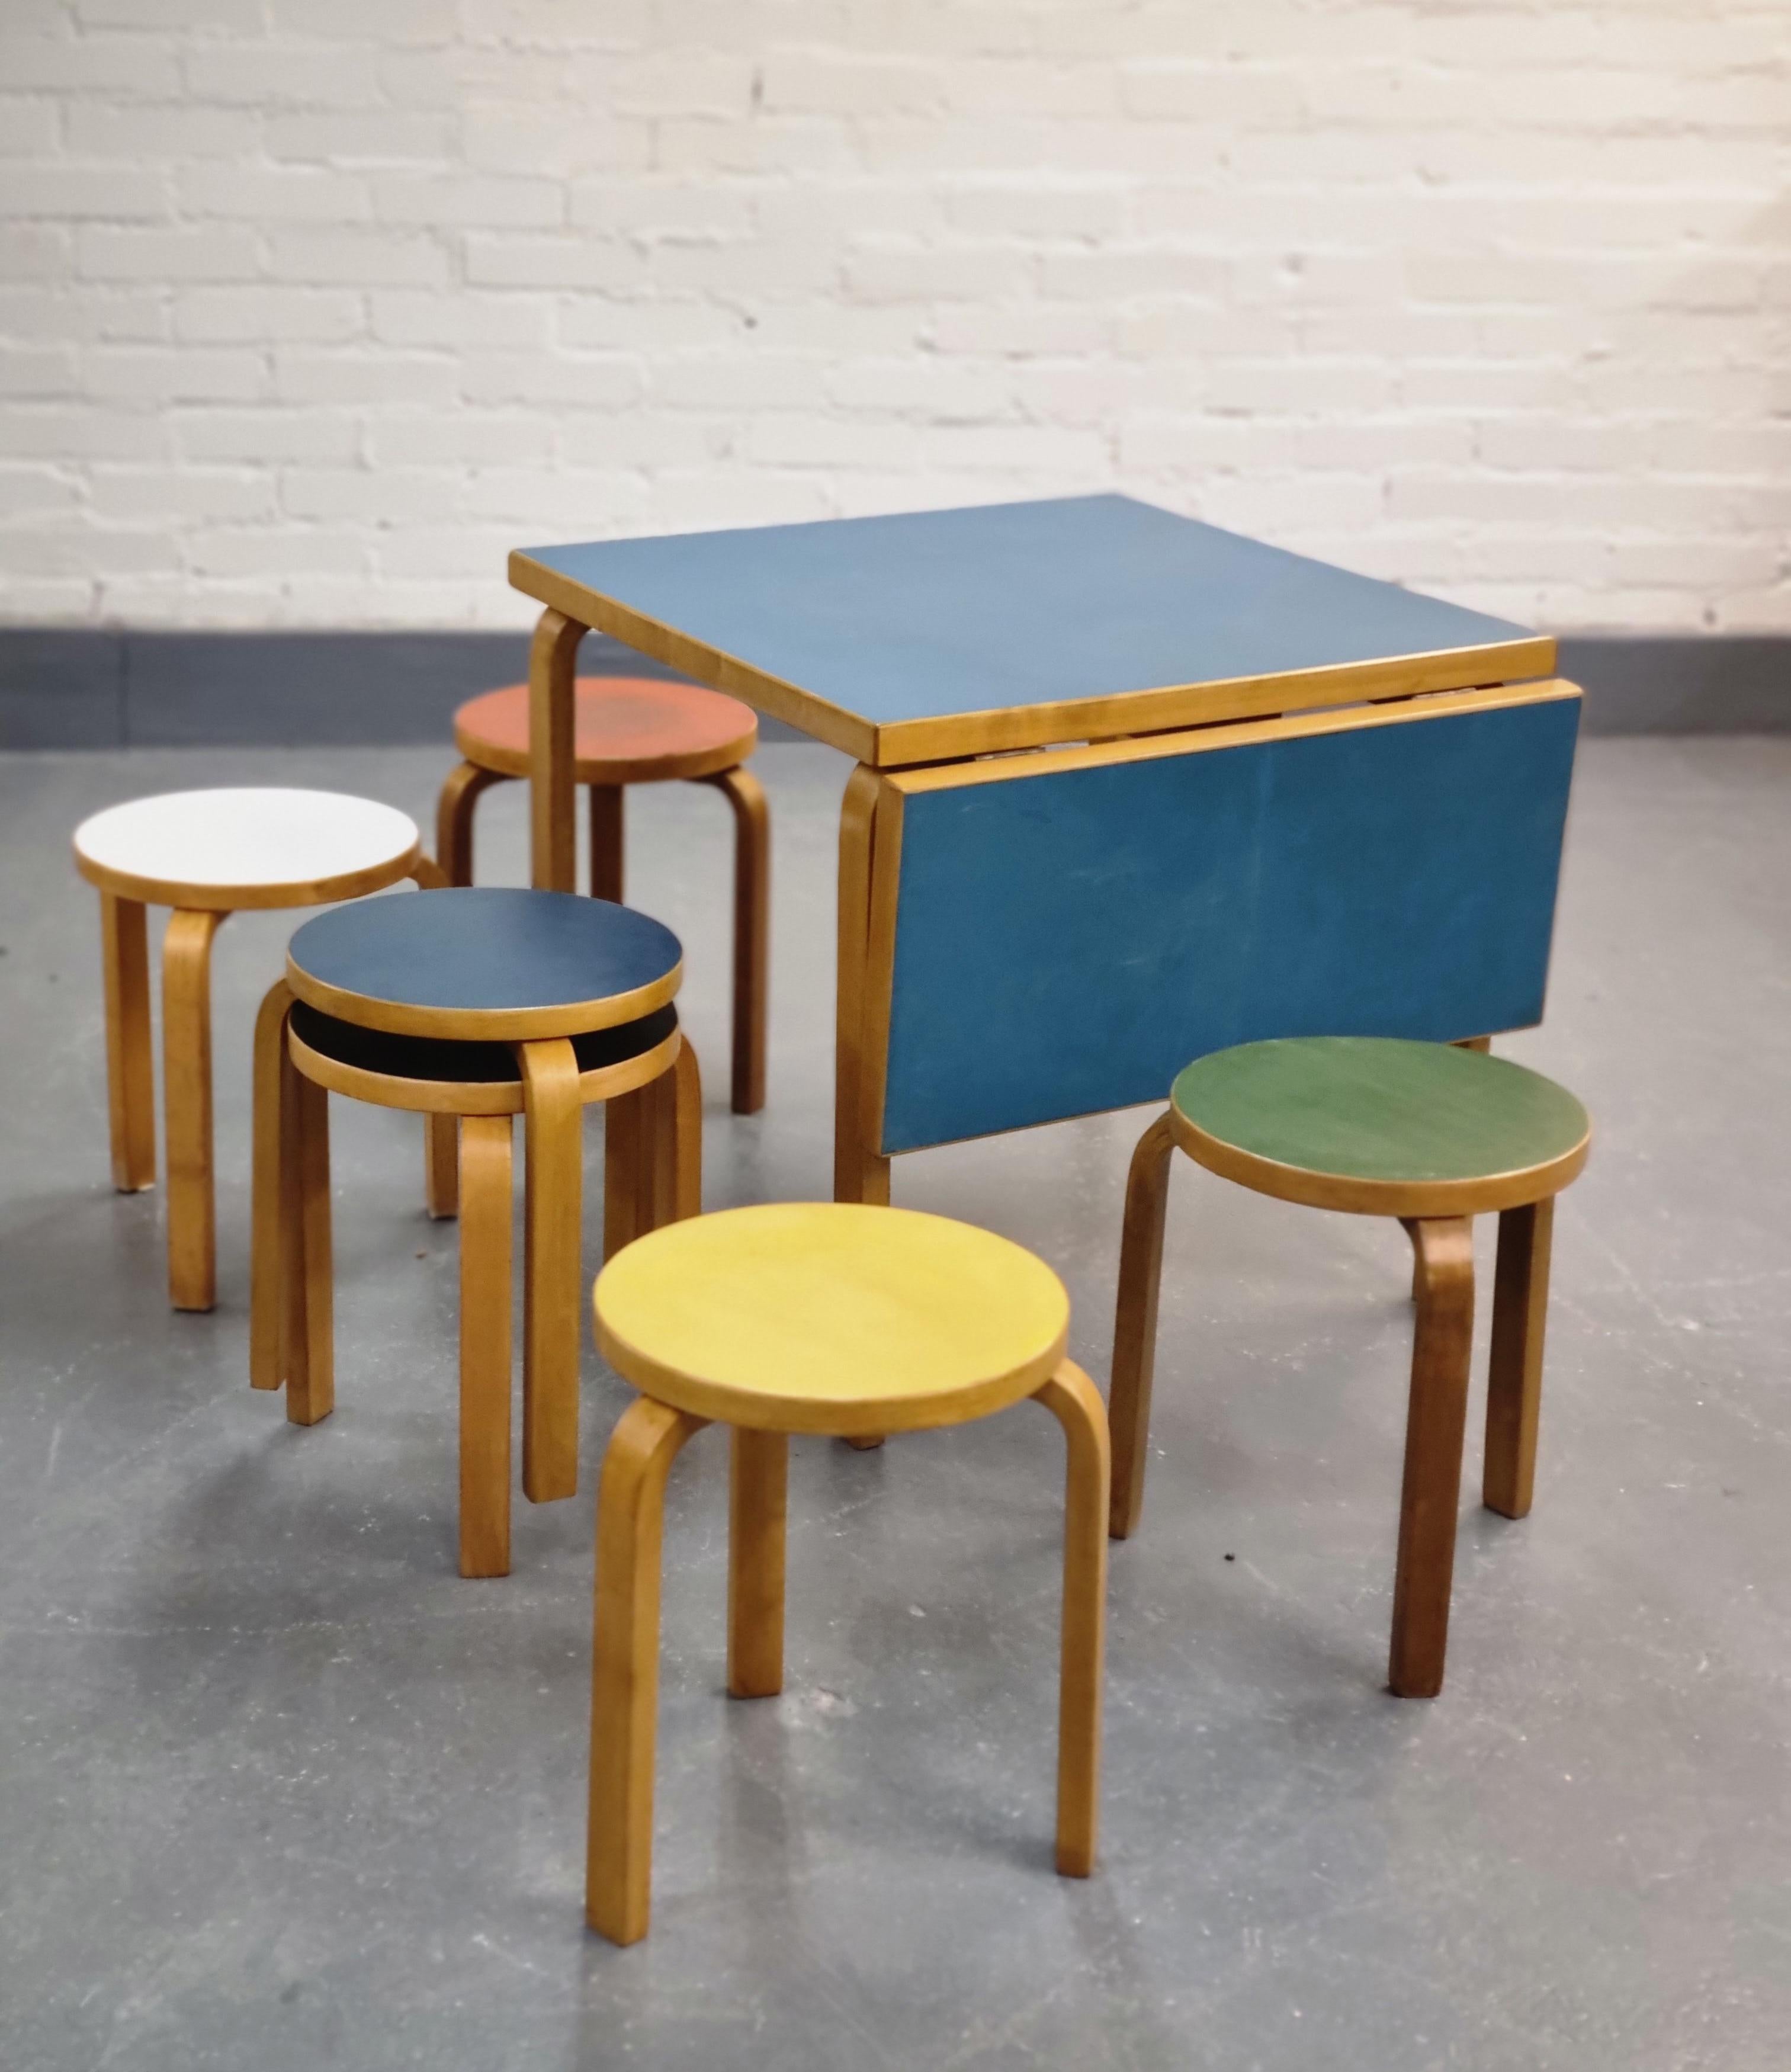 This extremely colourful set of 6 stools and a clapper table adds playfullness into your home while still keeping up the elegance of classic Alvar Aalto furniture. The different bright colours in this set will stand out in any interior and bring out